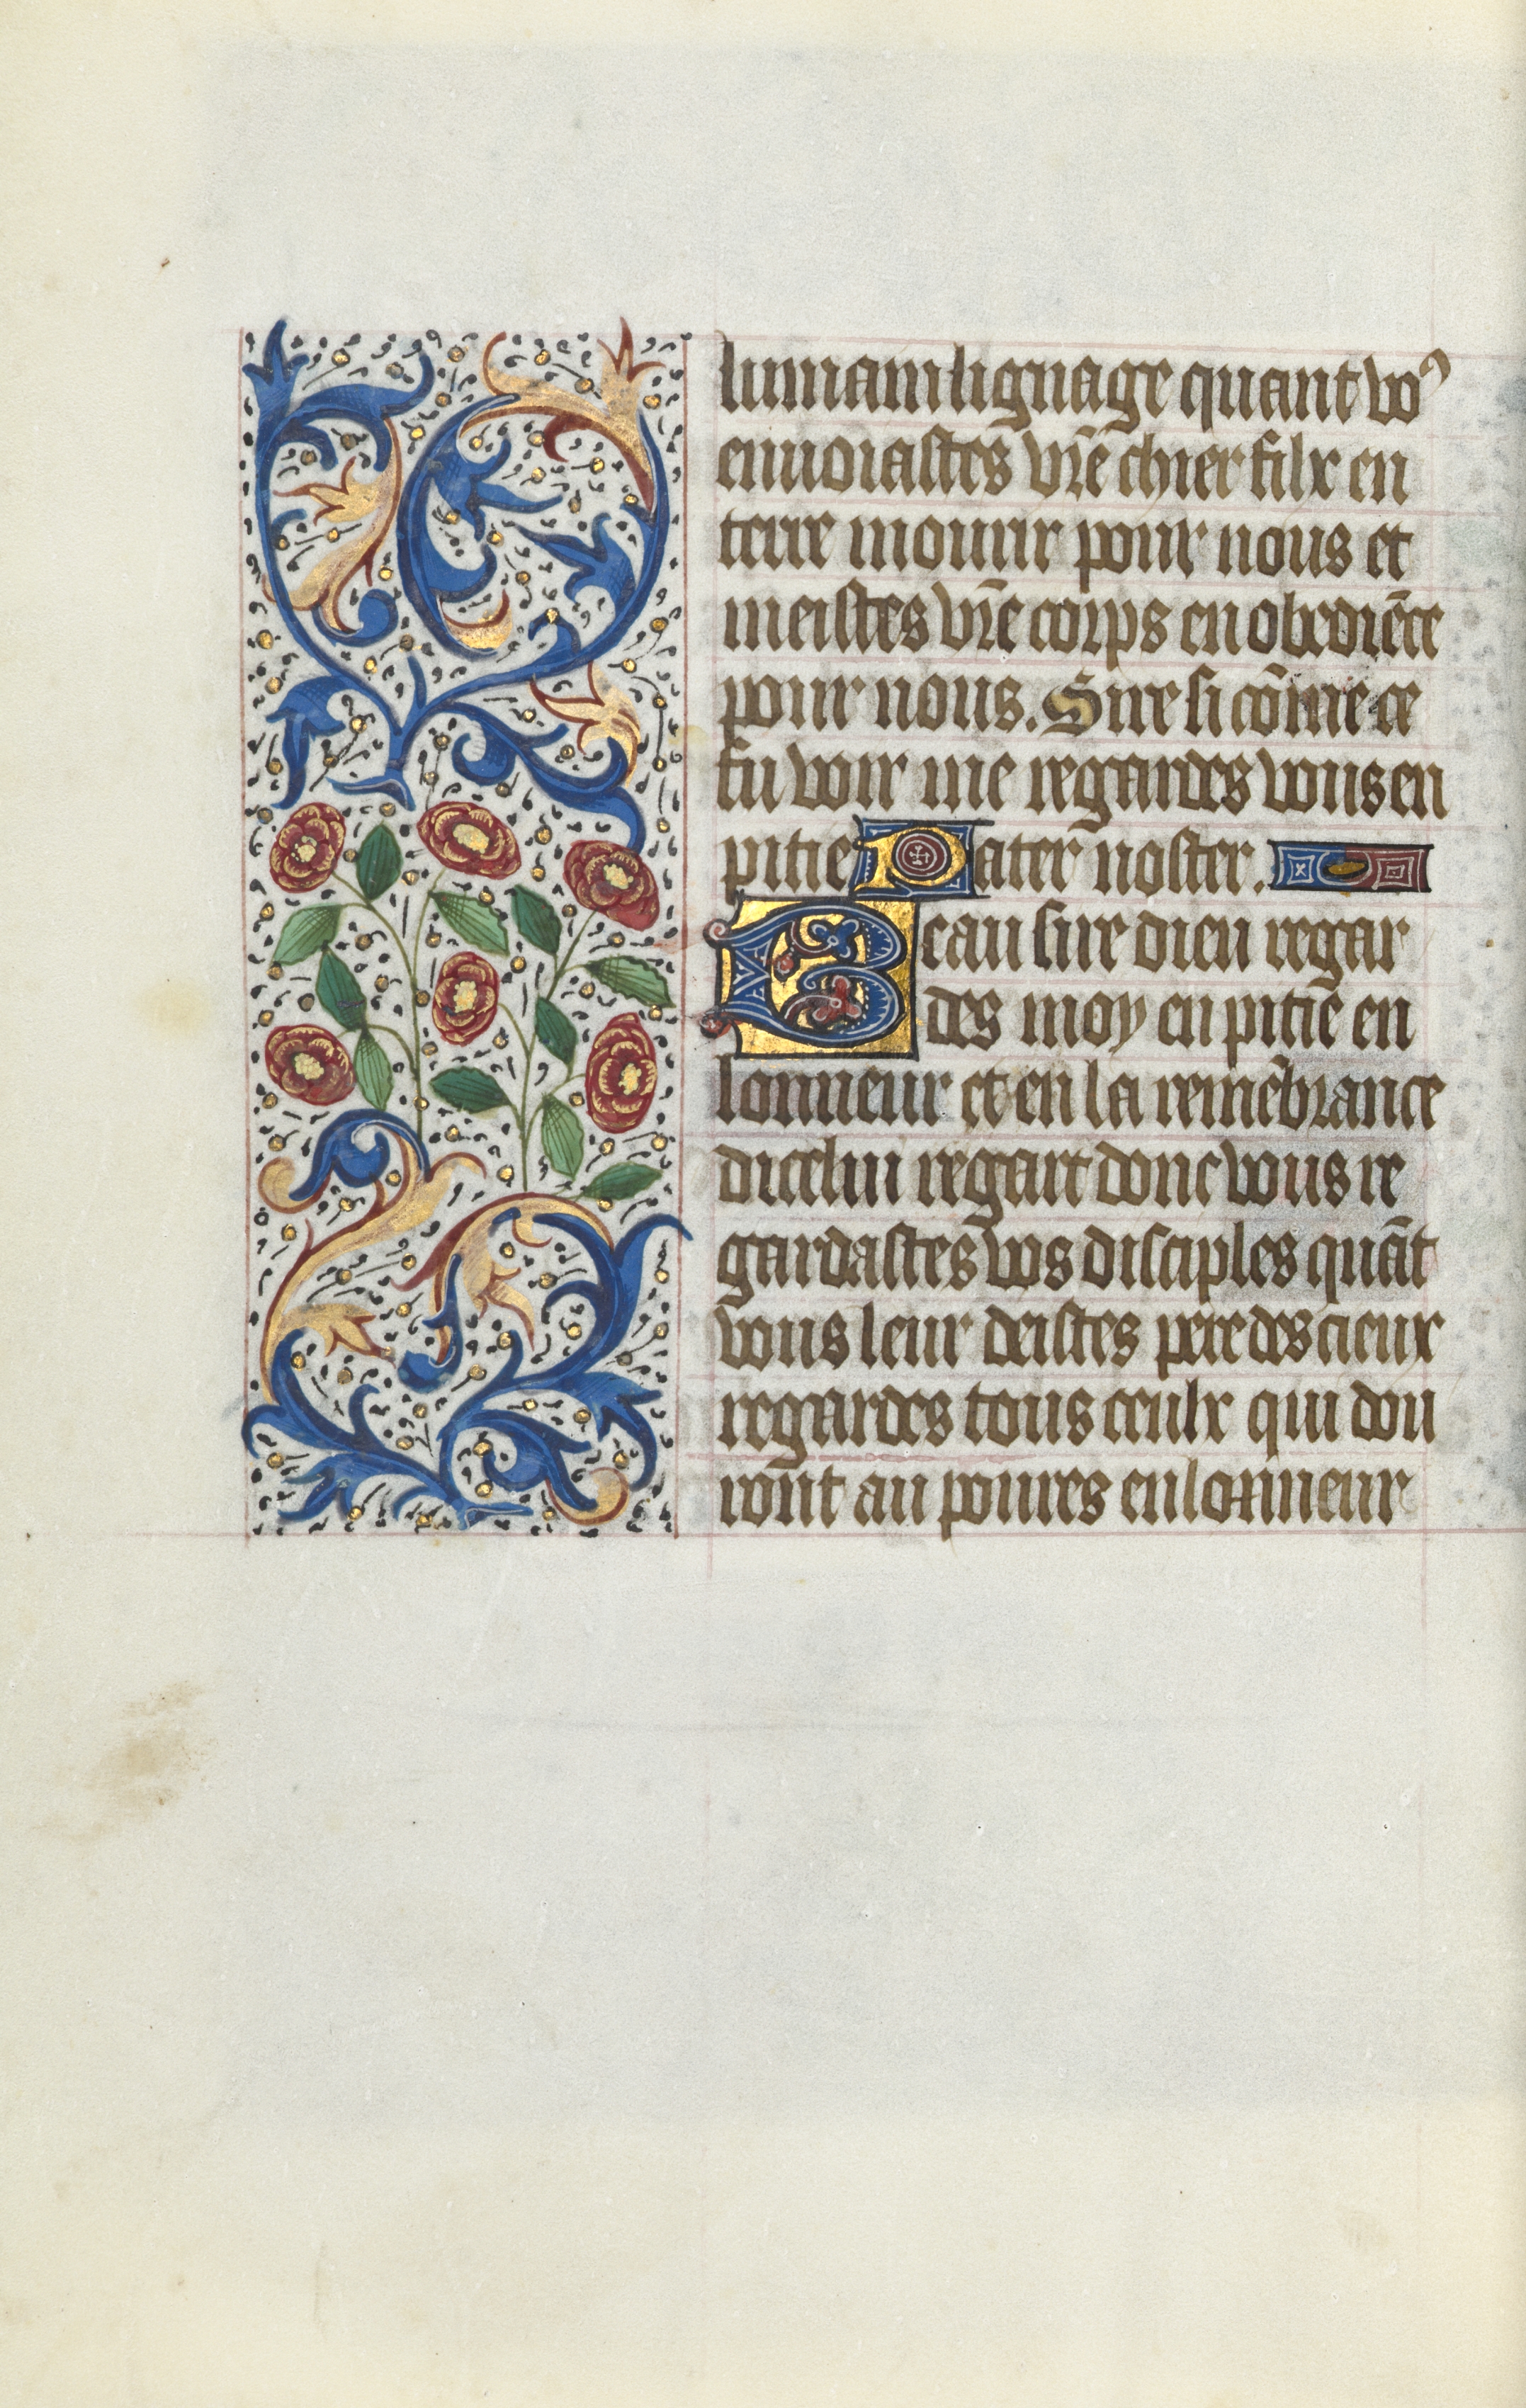 Book of Hours (Use of Rouen): fol. 152v